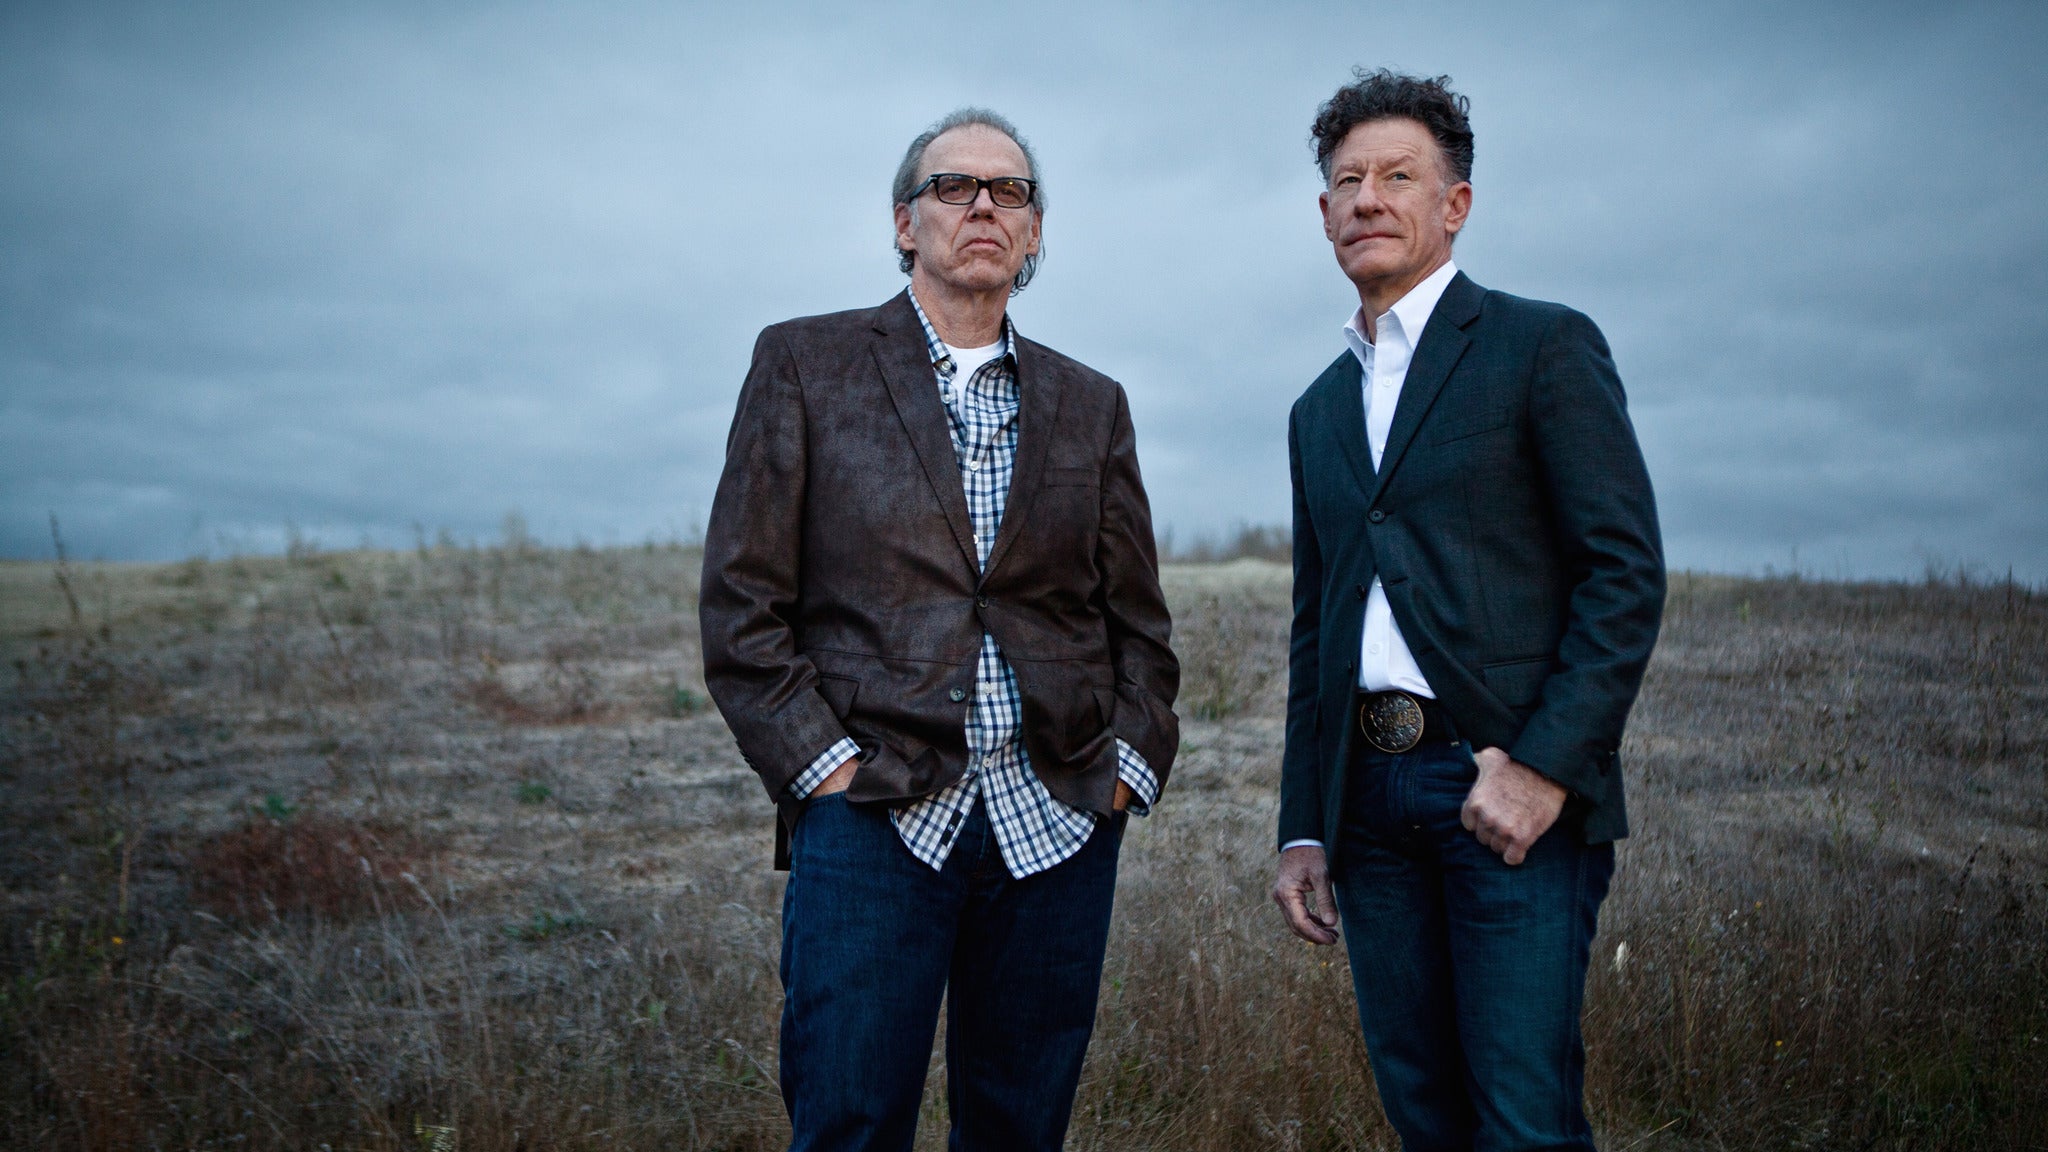 Image used with permission from Ticketmaster | Lyle Lovett and John Hiatt tickets